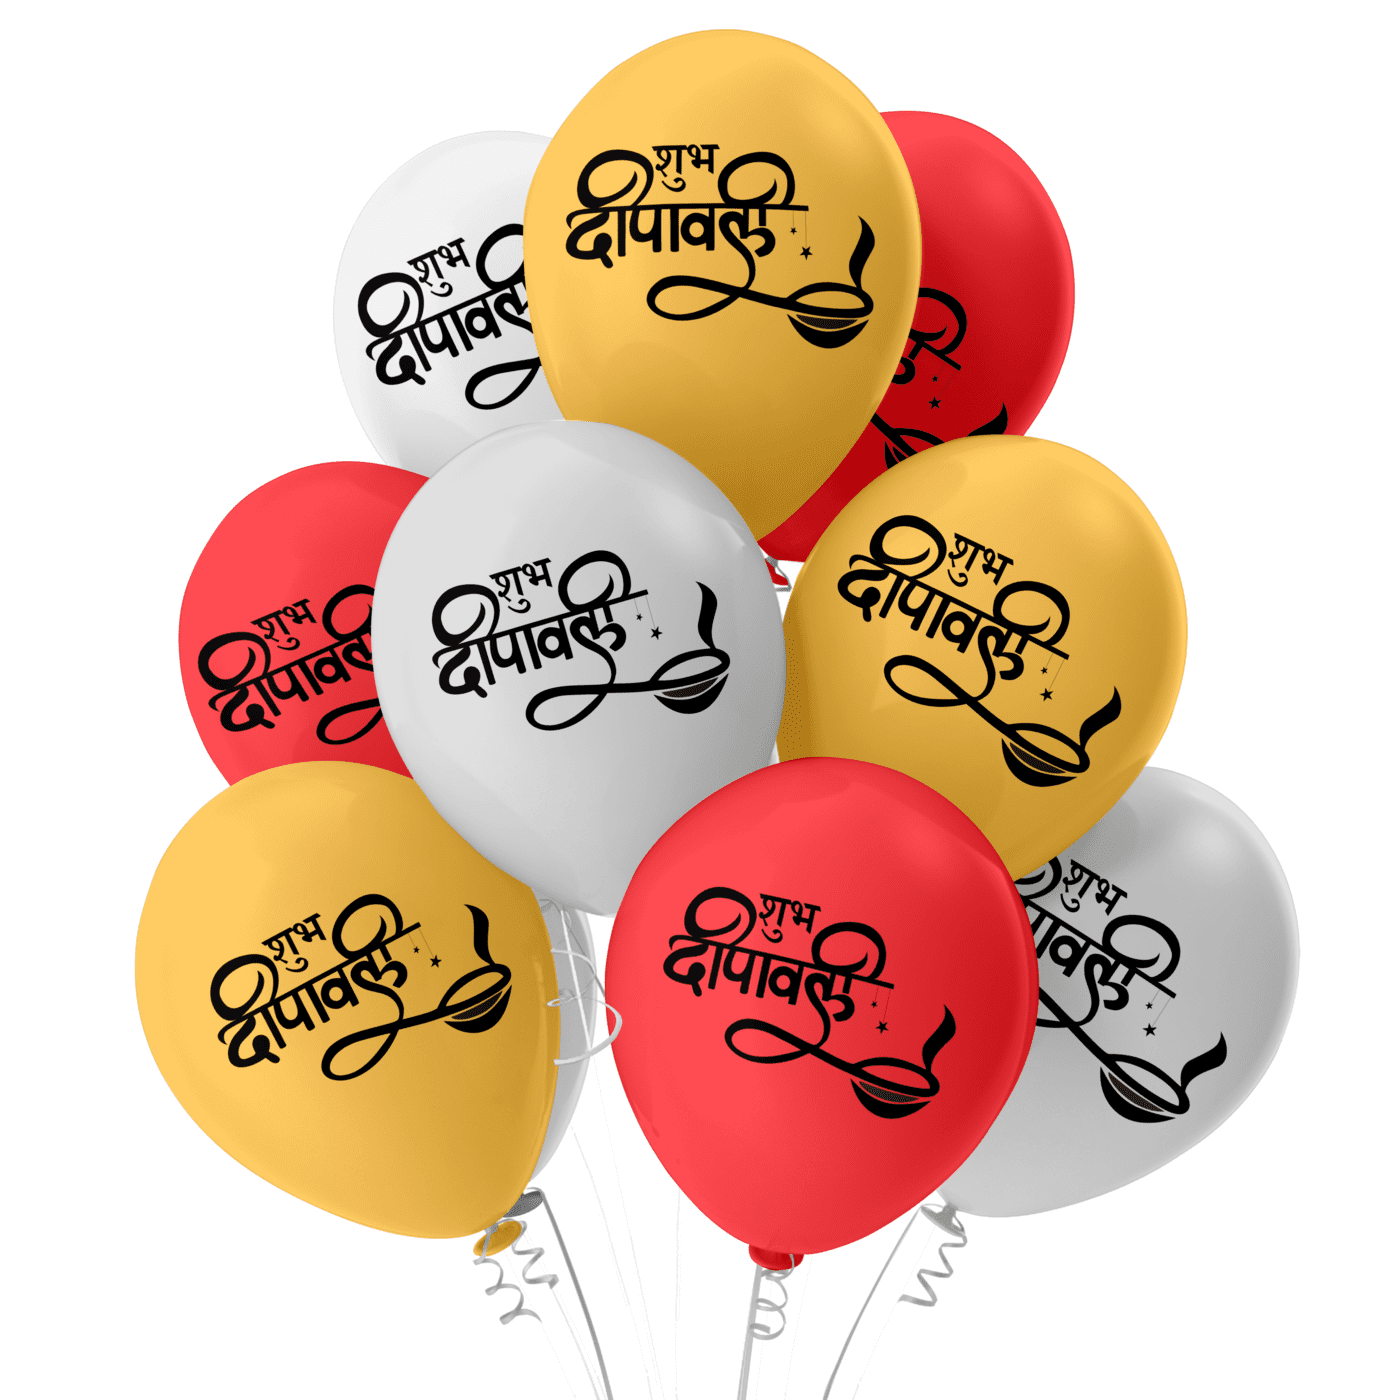 The Magic Balloons- Diwali festival Decoration Balloons for Shubh Deepawali, Diwali decorations/Party supplies for Home/Office/Shop Pack of 30 multicolour Gold, Silver metallic Red balloons- 181474